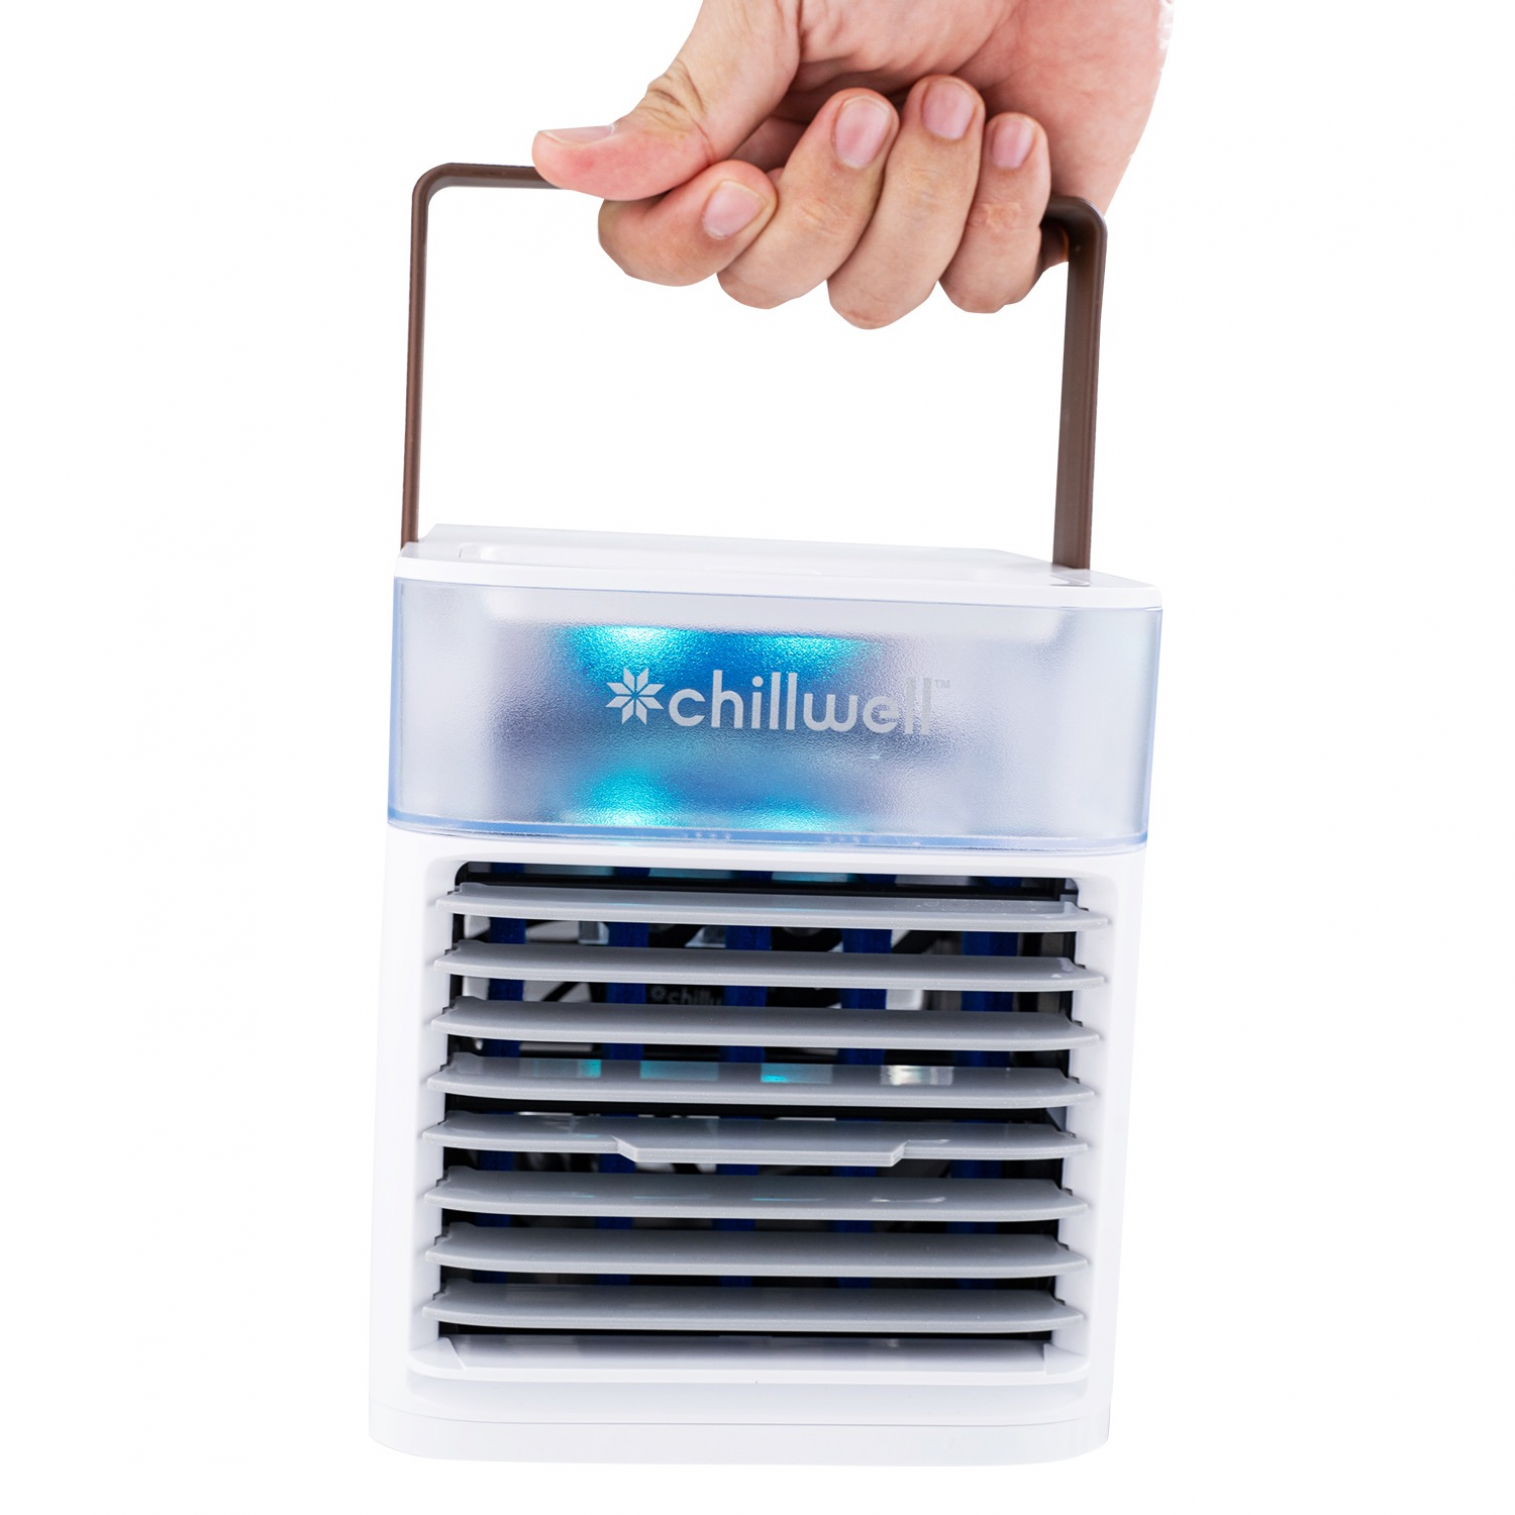 Chillwell Ac Cooler Near Me